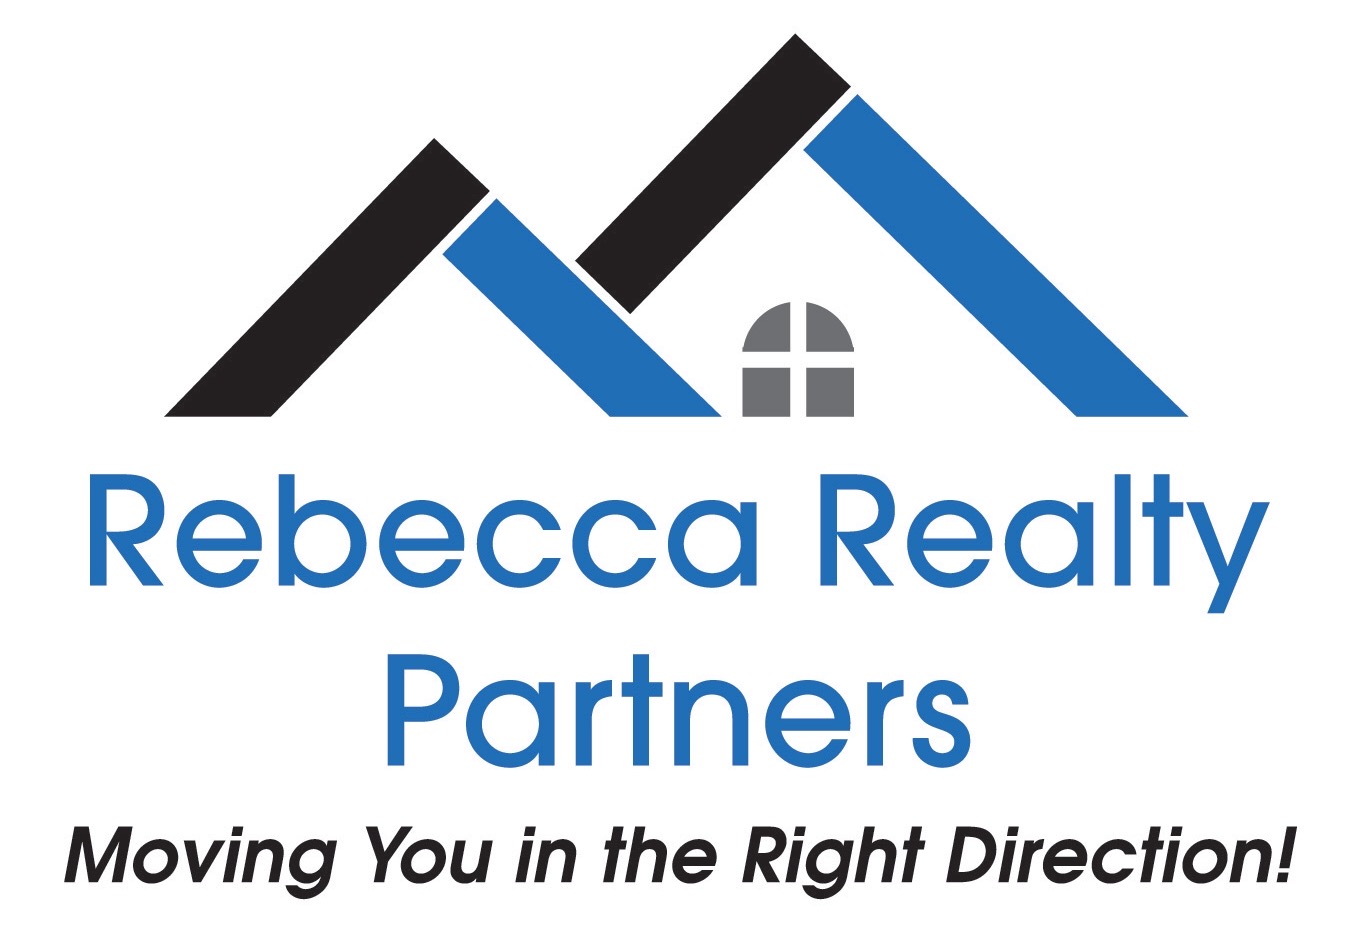 Rebecca Realty Partners